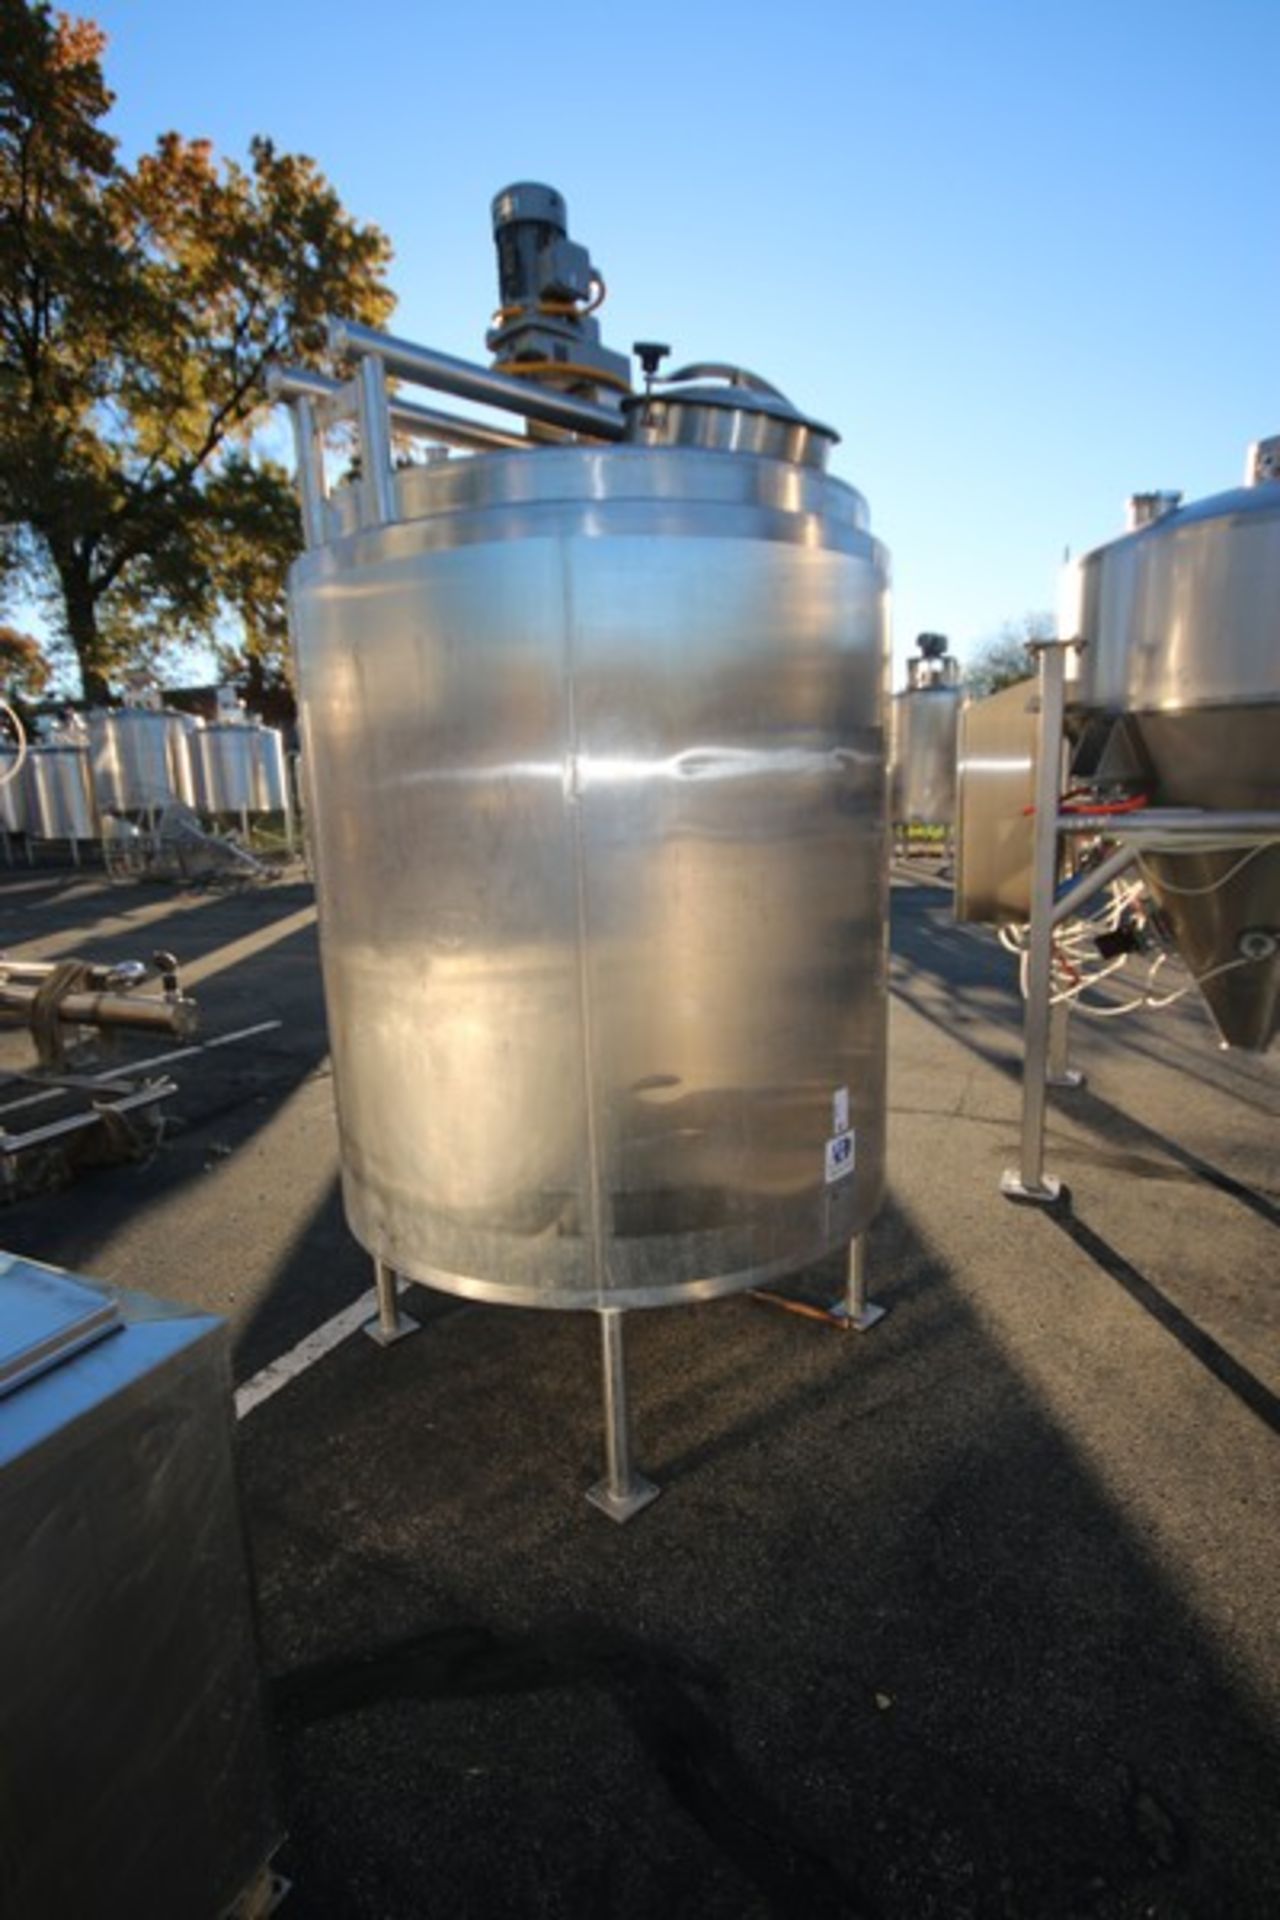 2015 A&B 600 Gal. Insulated Vertical S/S Mix Tank, M/N MIX TANK, S/N 1506690604, Mounted on S/S Legs